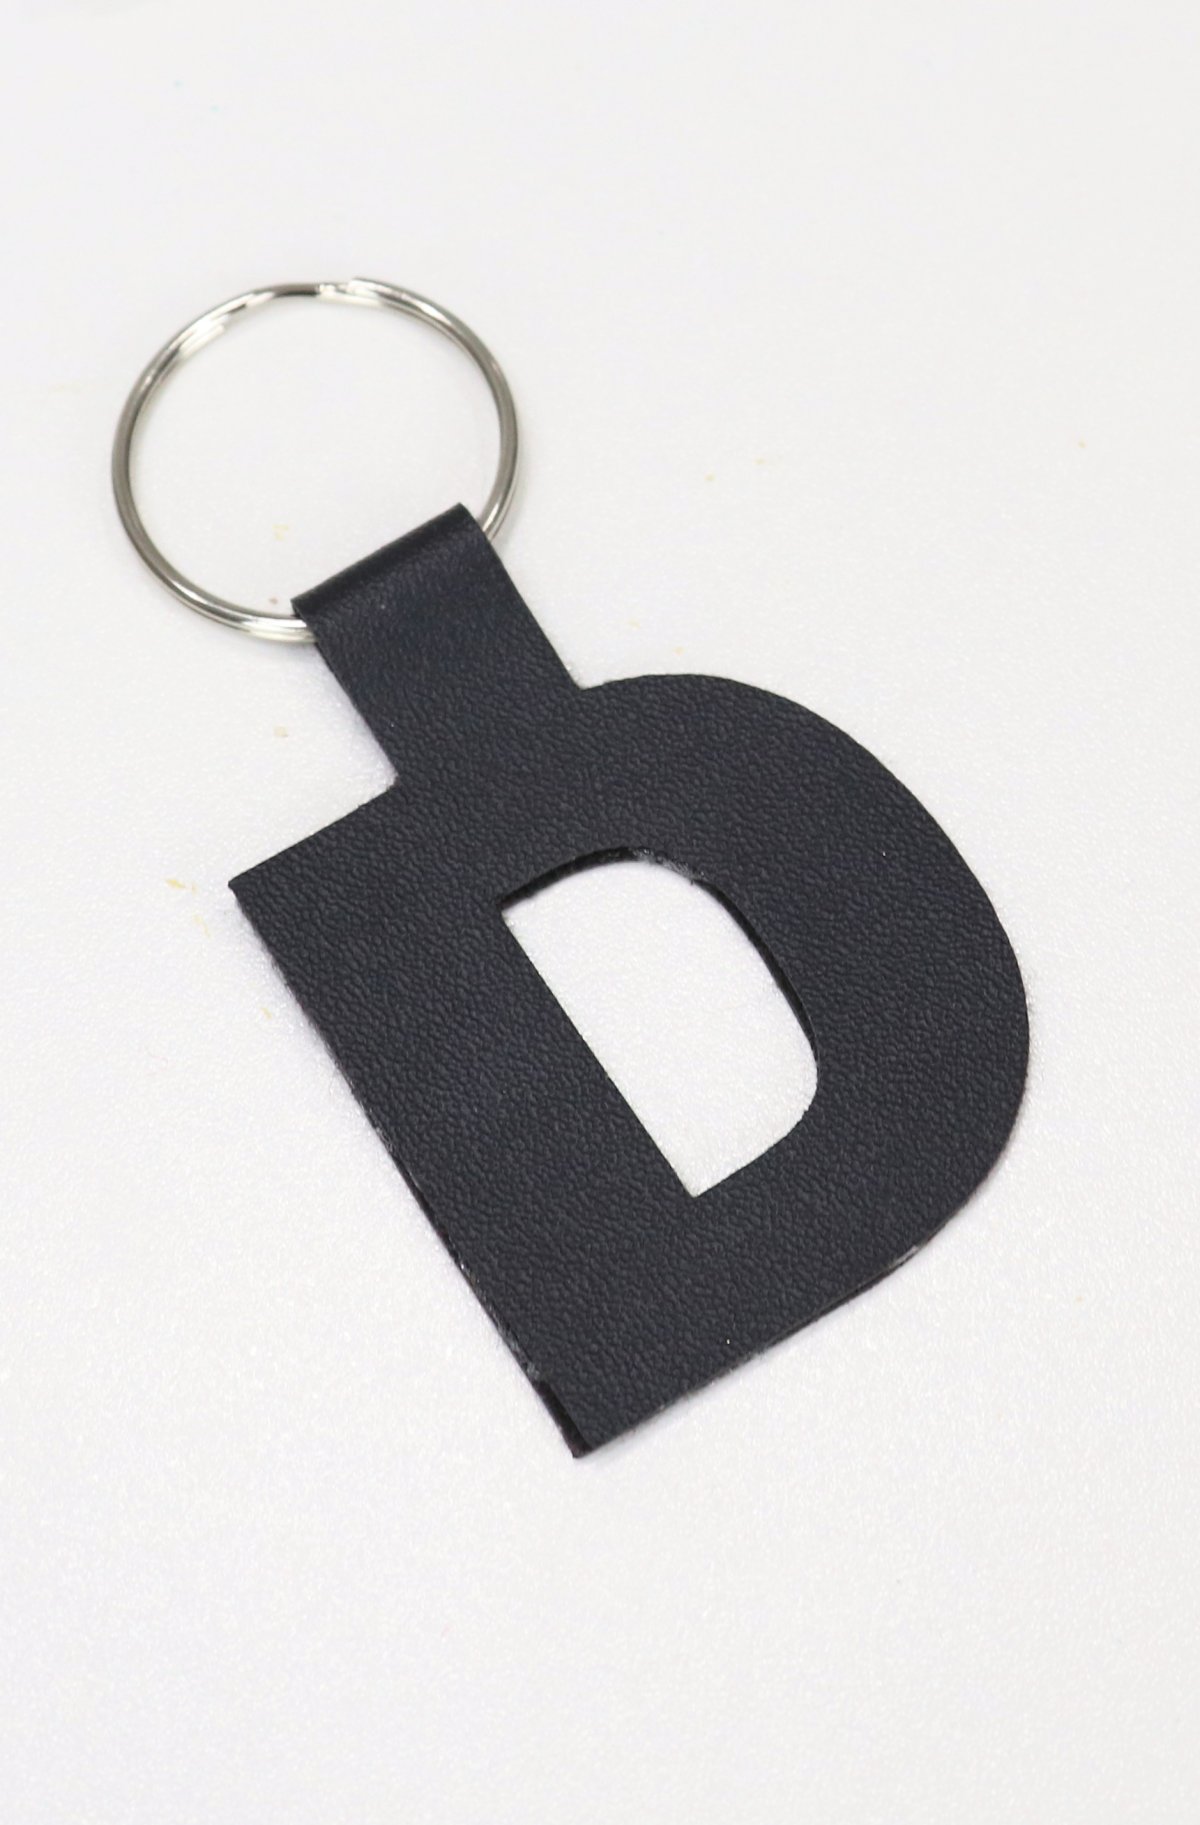 Image contains a black monogram “D” cut from faux leather and attached to a metal keyring.